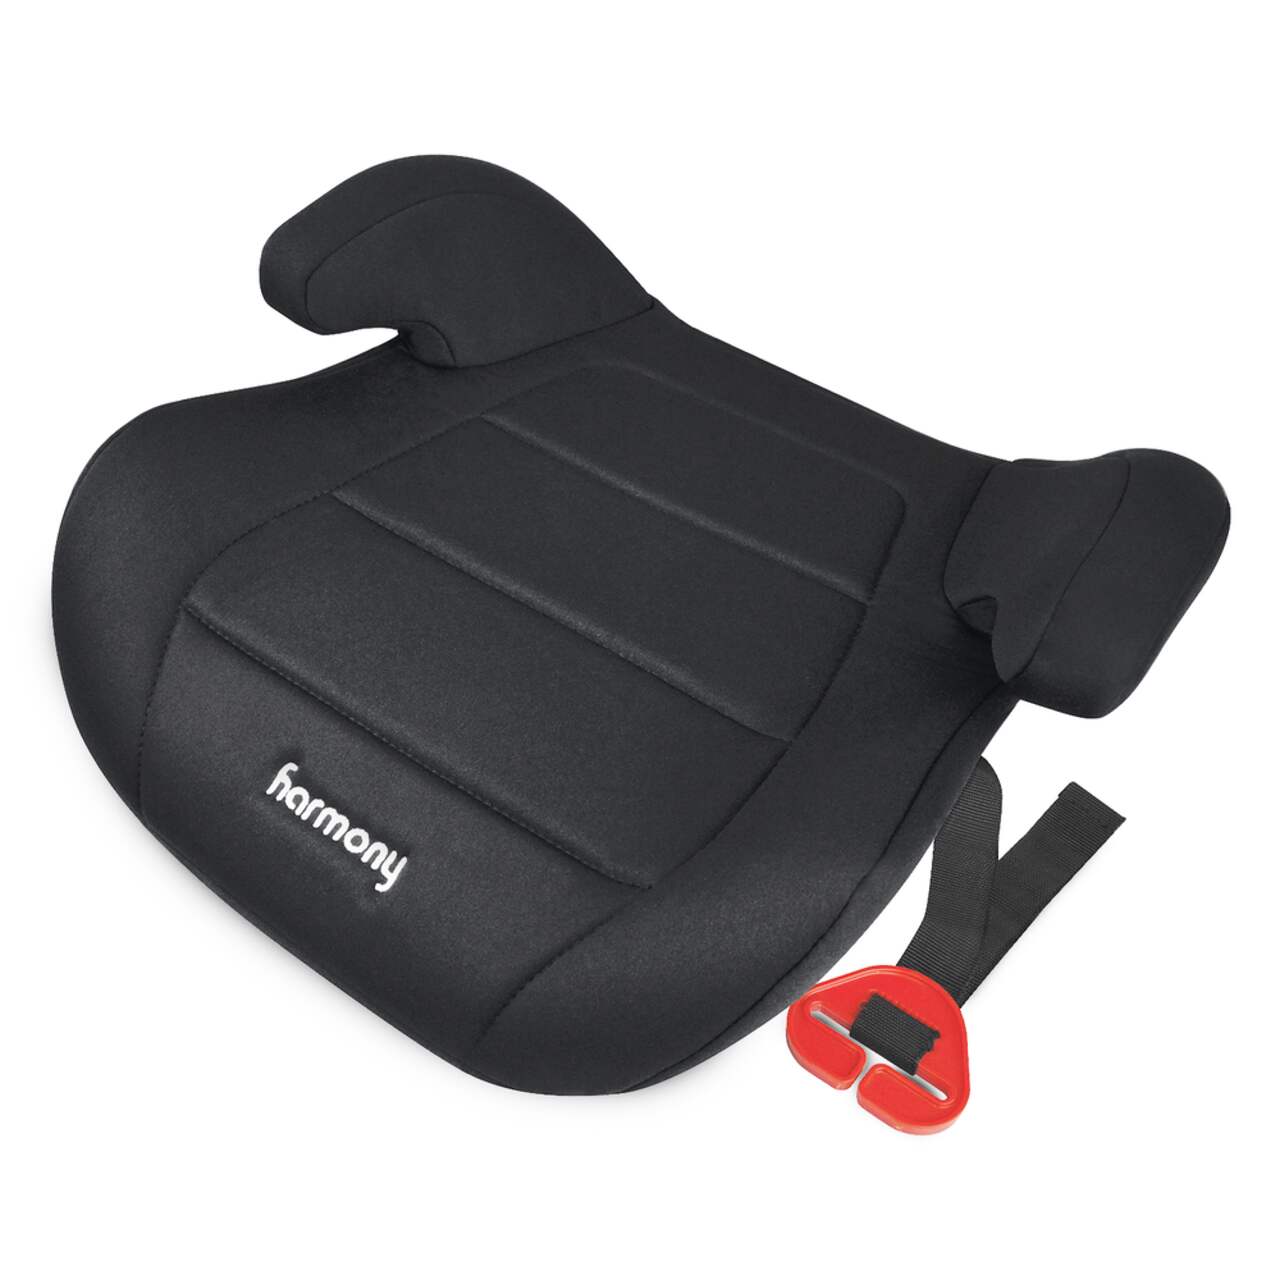 https://media-www.canadiantire.ca/product/automotive/car-care-accessories/child-travel-baby/0464790/harmony-dash-backless-booster-car-seat-c05c4b49-1740-498d-bde1-9f97b0c2eb1f.png?imdensity=1&imwidth=640&impolicy=mZoom